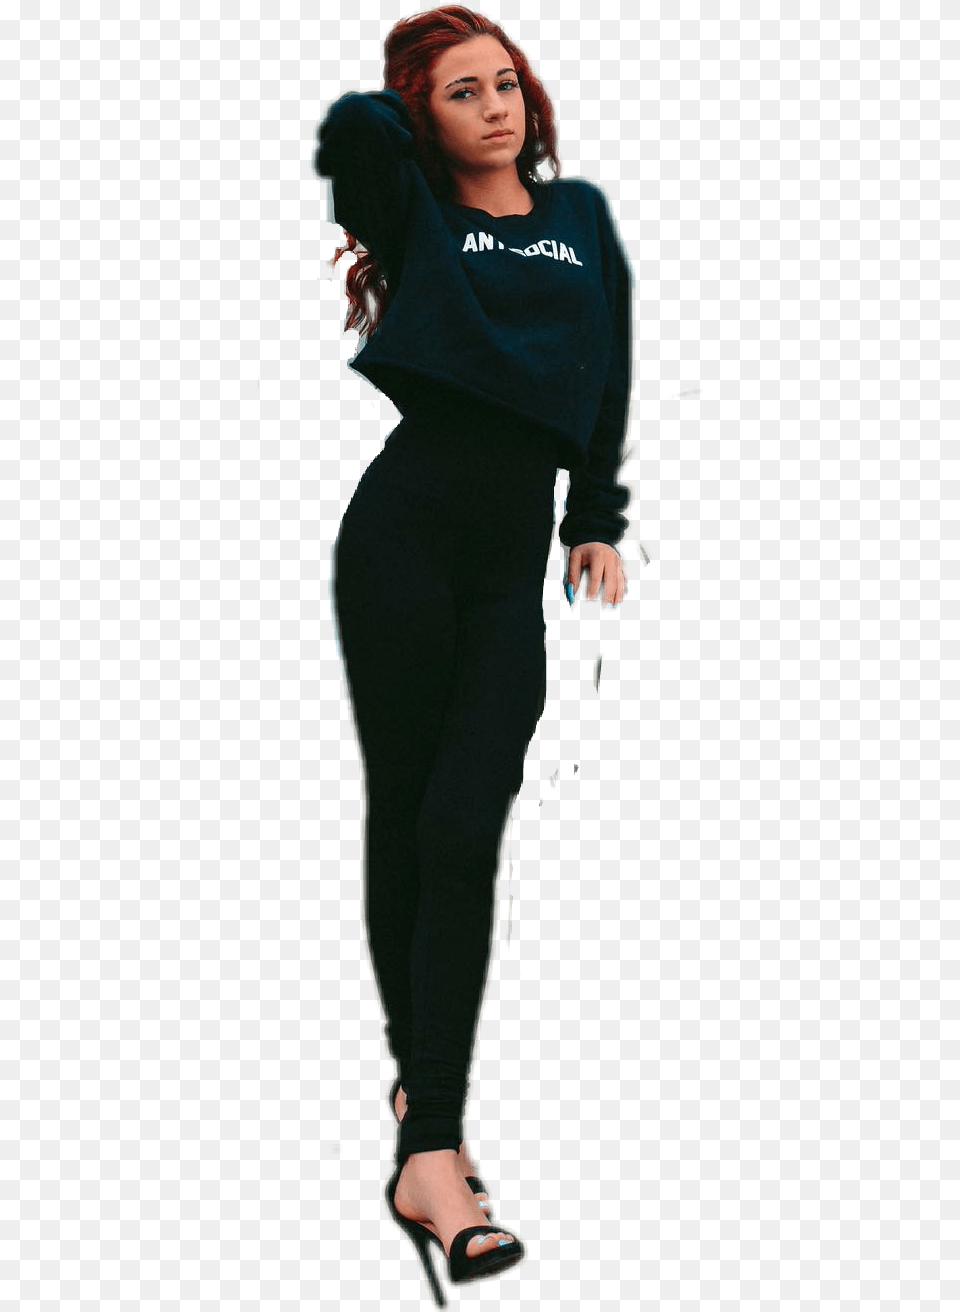 Report Abuse Bhad Bhabie Wearing Shorts, Pants, Clothing, Sleeve, Shoe Png